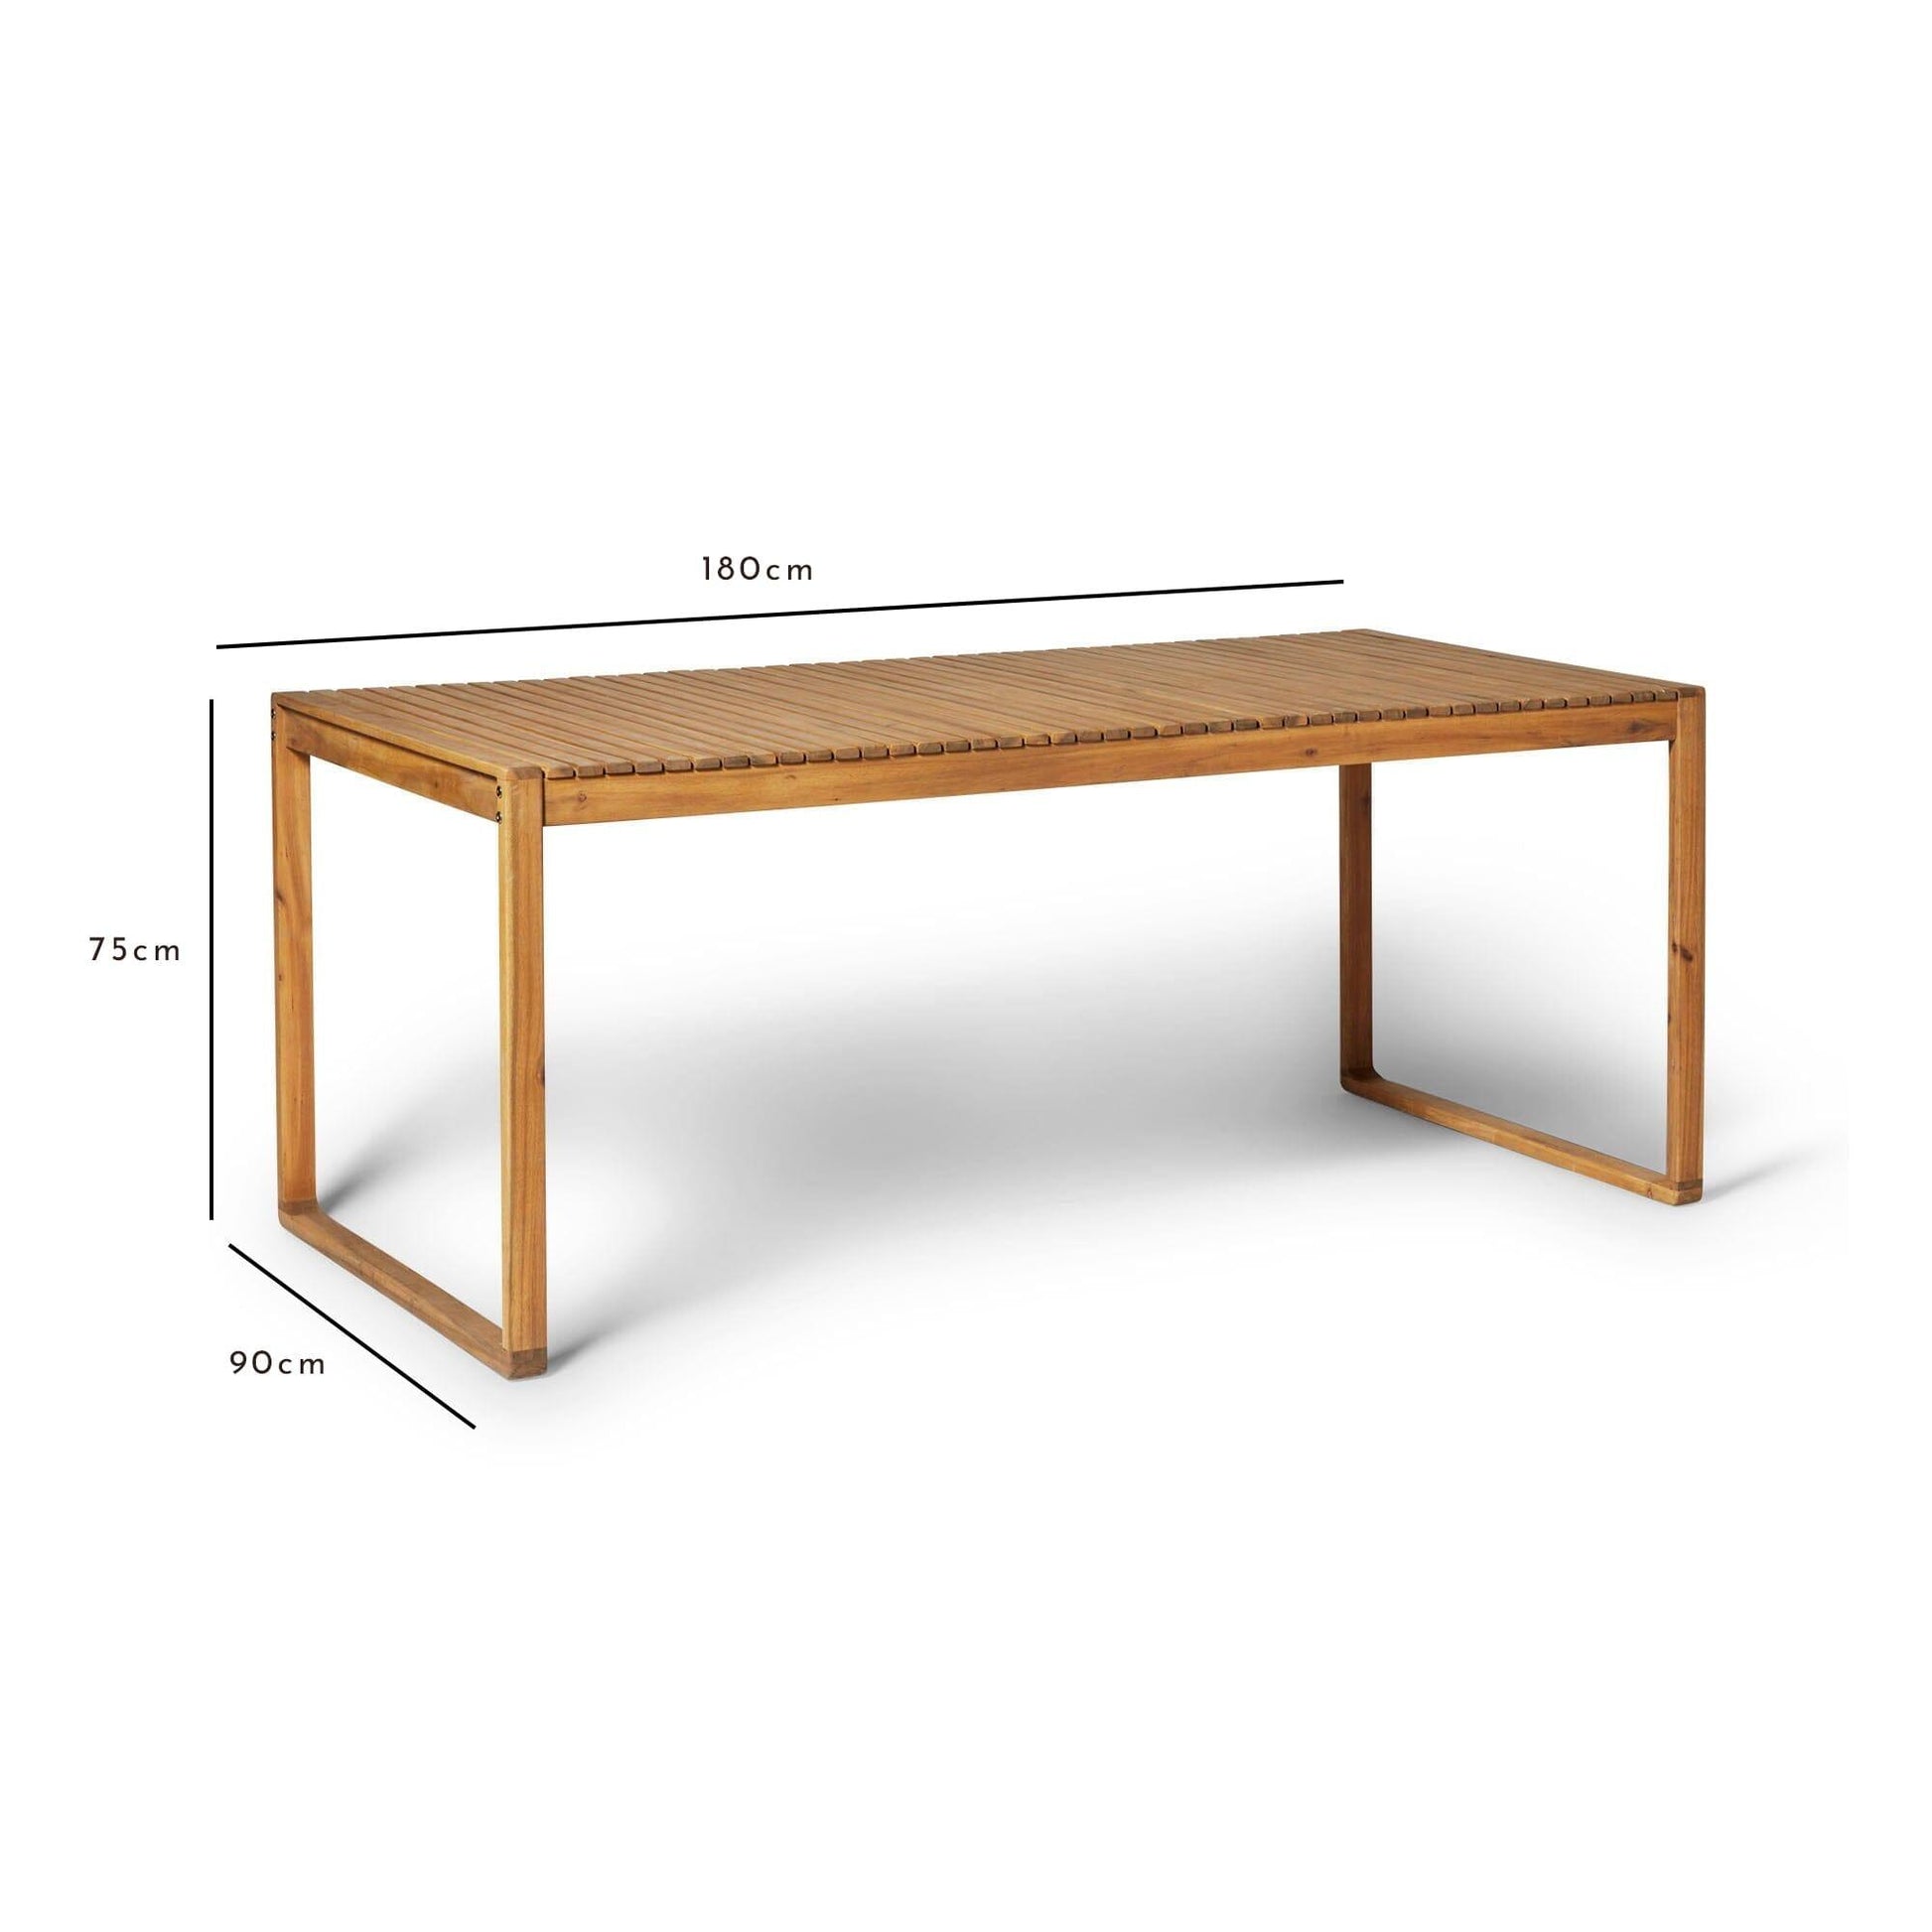 Lennox Solid Wood Garden Dining Table